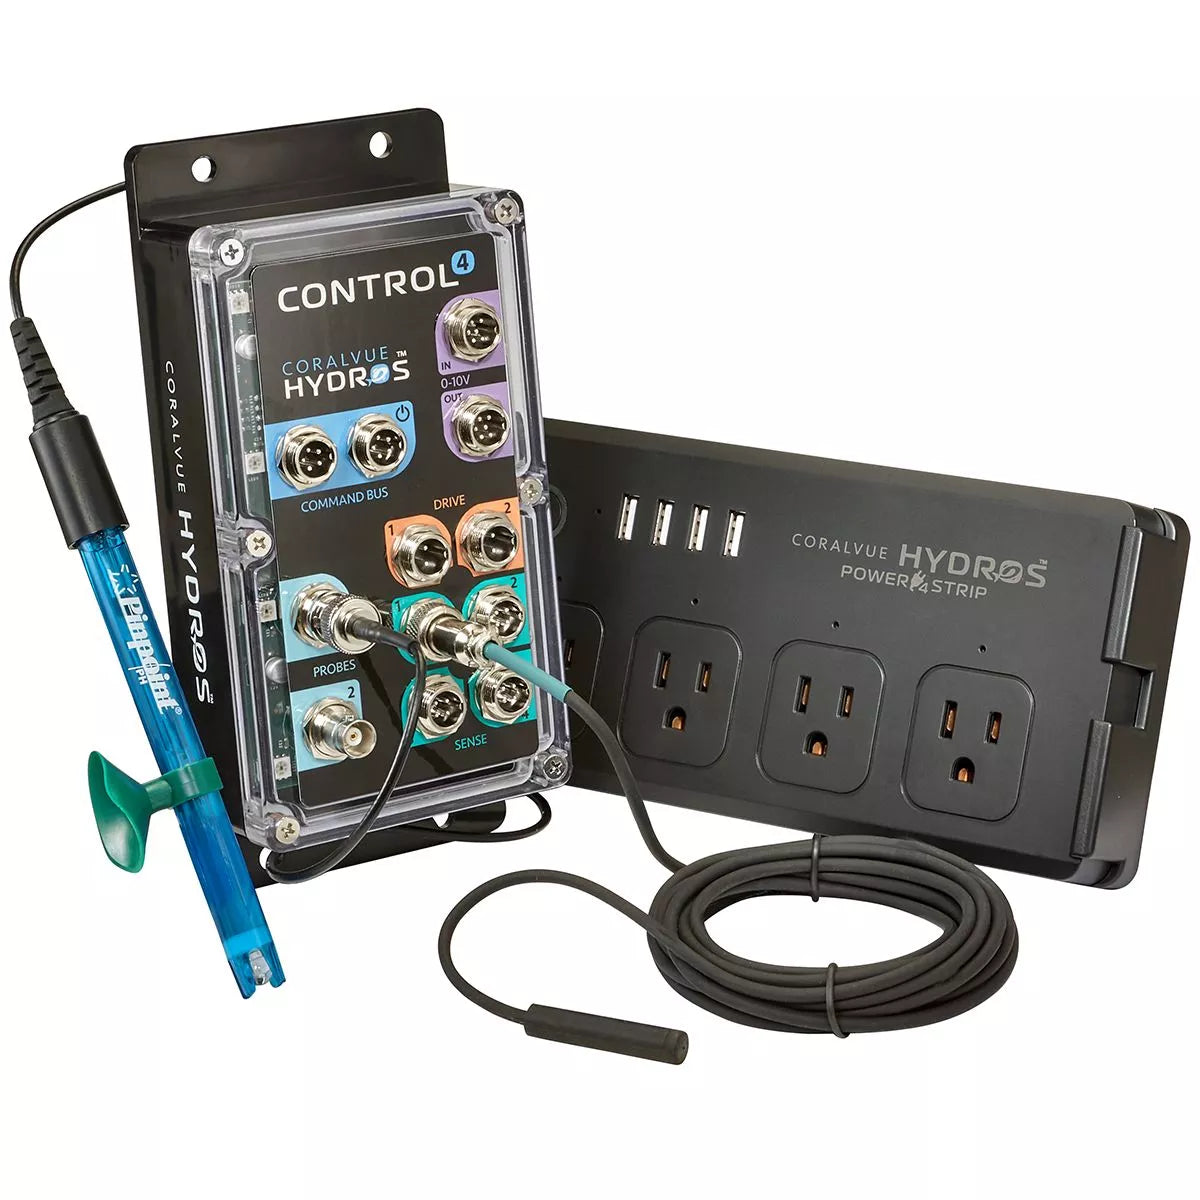 The HYDROS Control X4 Starter Pack, by TAS, is a control box equipped with a power supply, sensor ports, and flow sensors. A wire connects the control box to various components for seamless integration and monitoring of your.